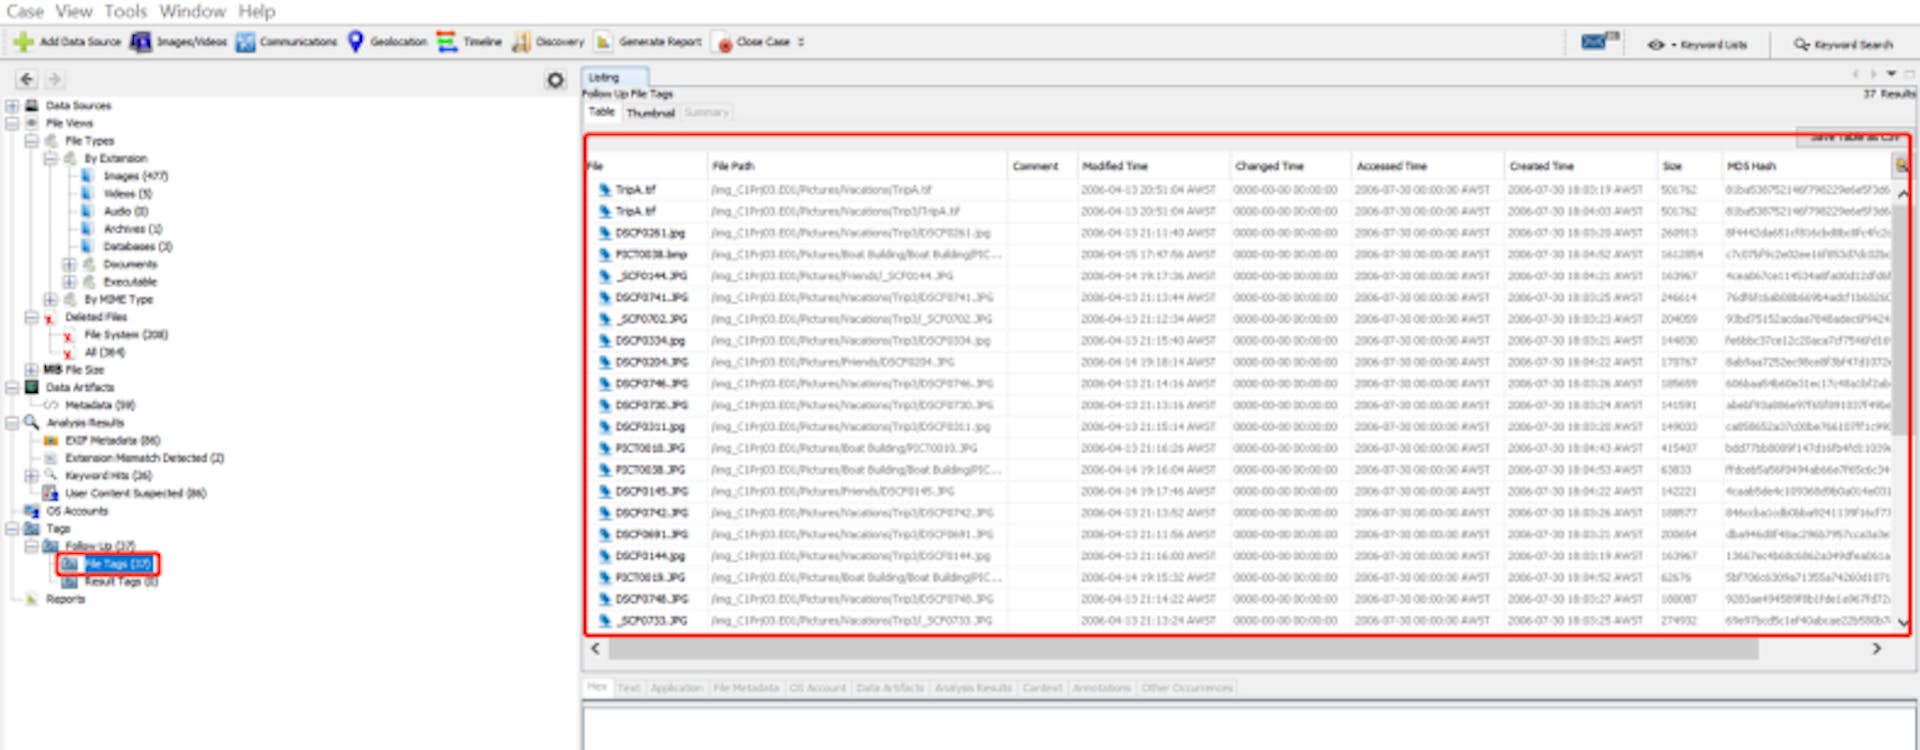 Figure 10. Tree Viewer pane- Identifying all the Follow Up Files.